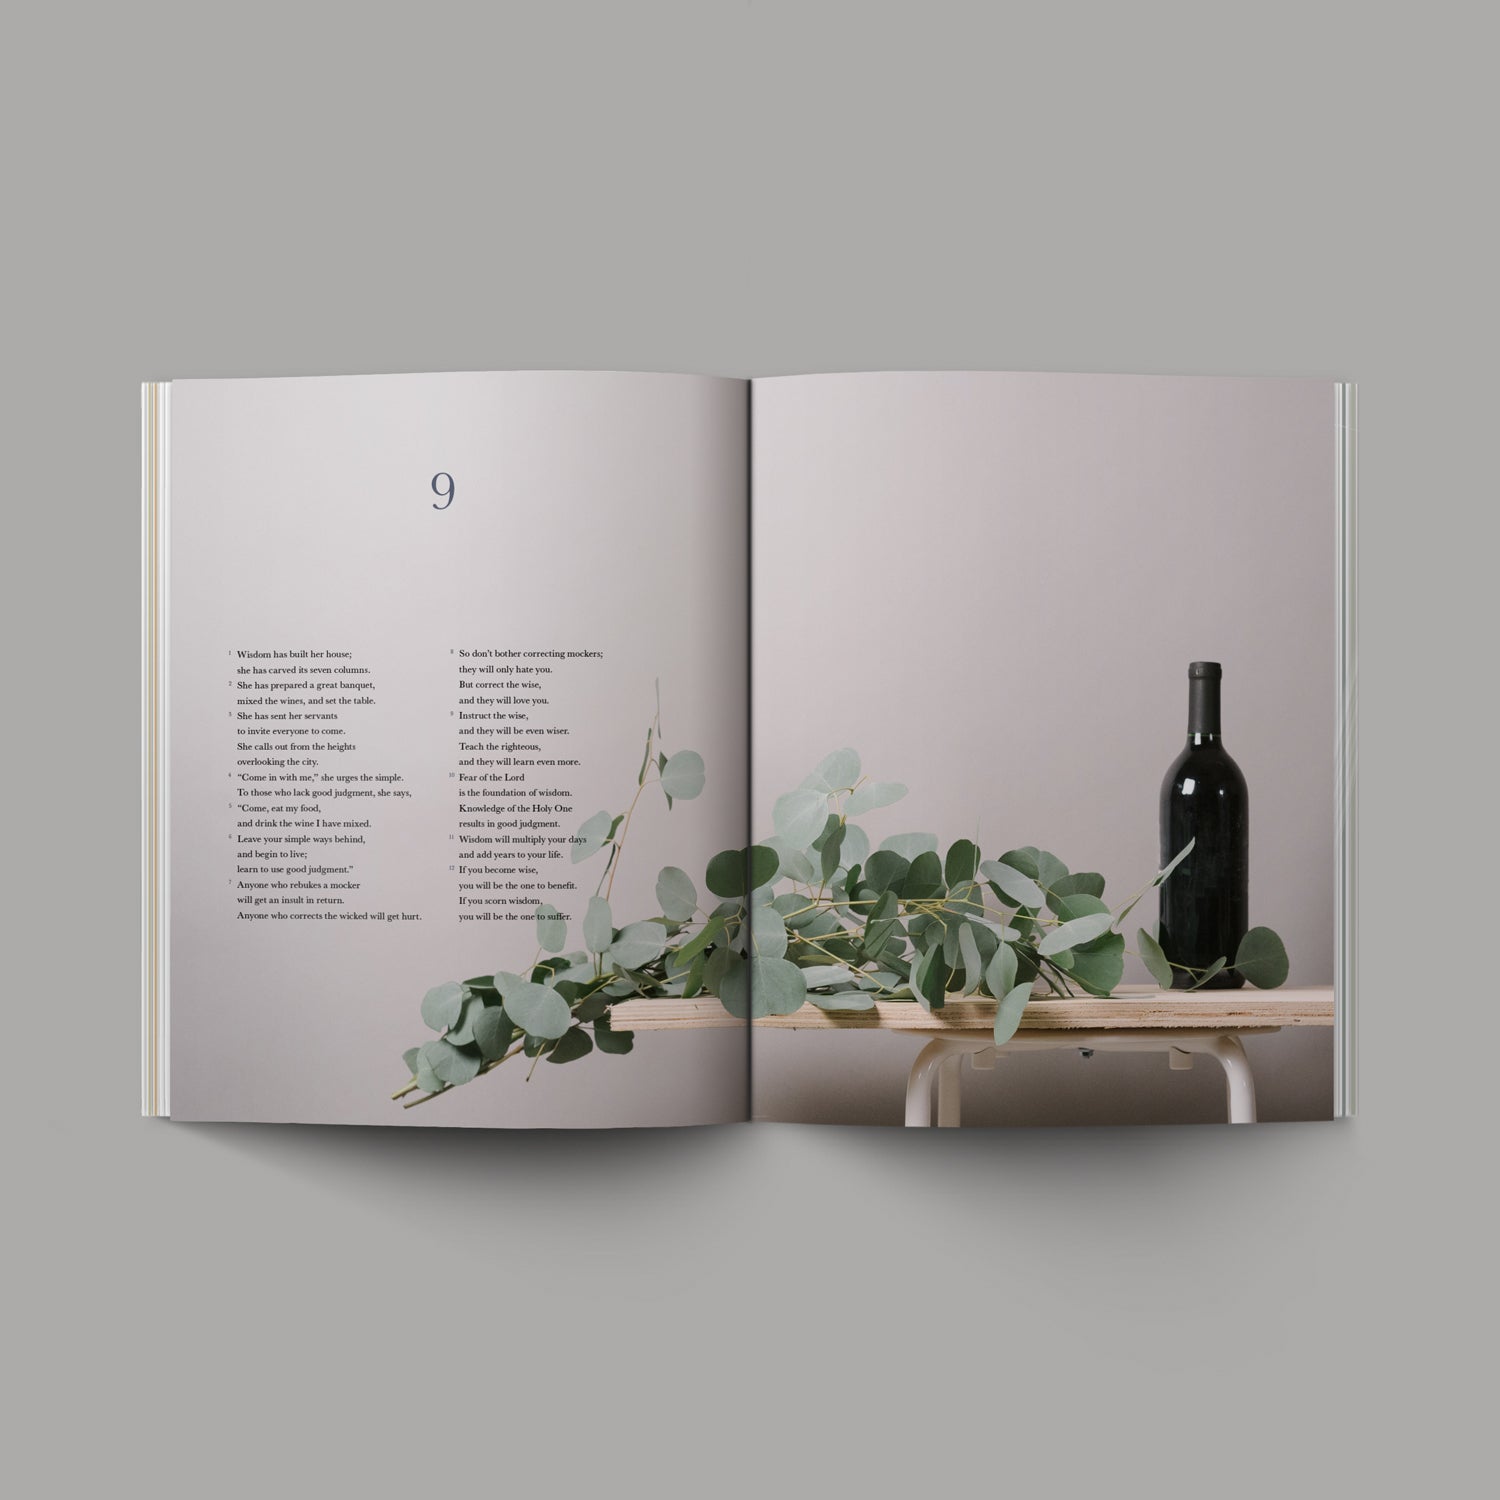 Book of Proverbs Chapter 9 Wooden table with green foliage and wine bottle